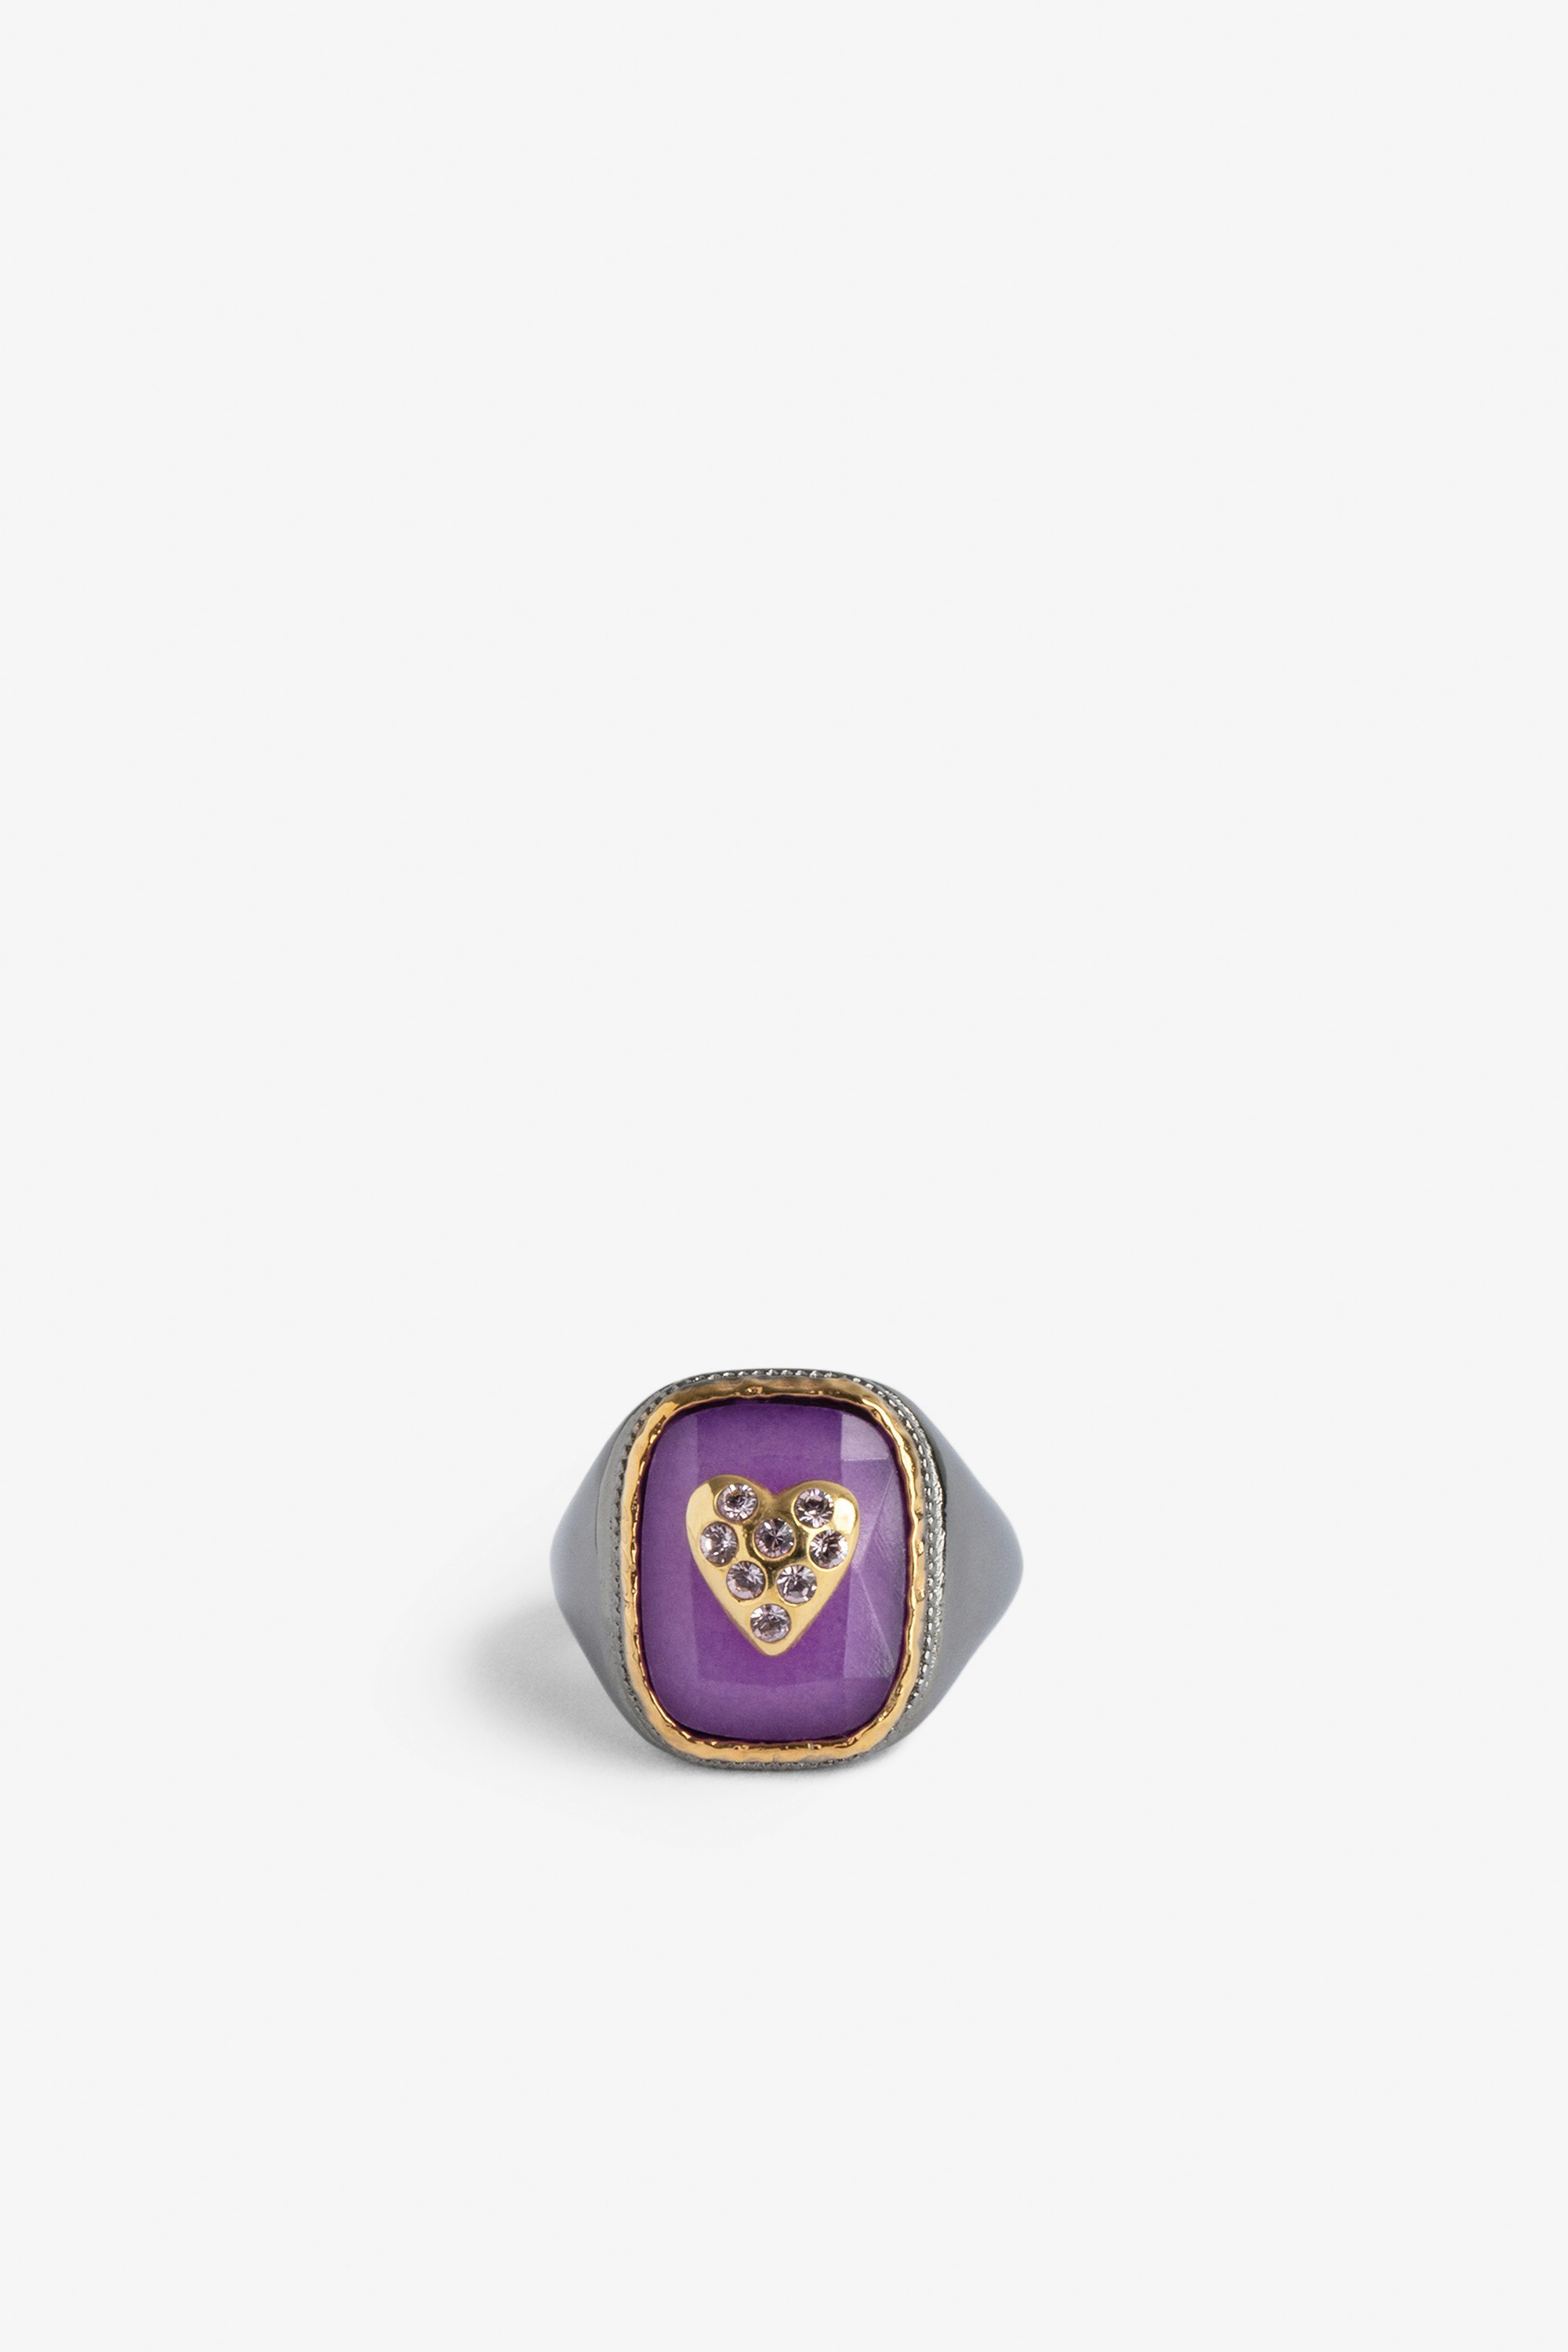 Heart signet ring Signet ring featuring a purple stone set with a gold-tone brass heart